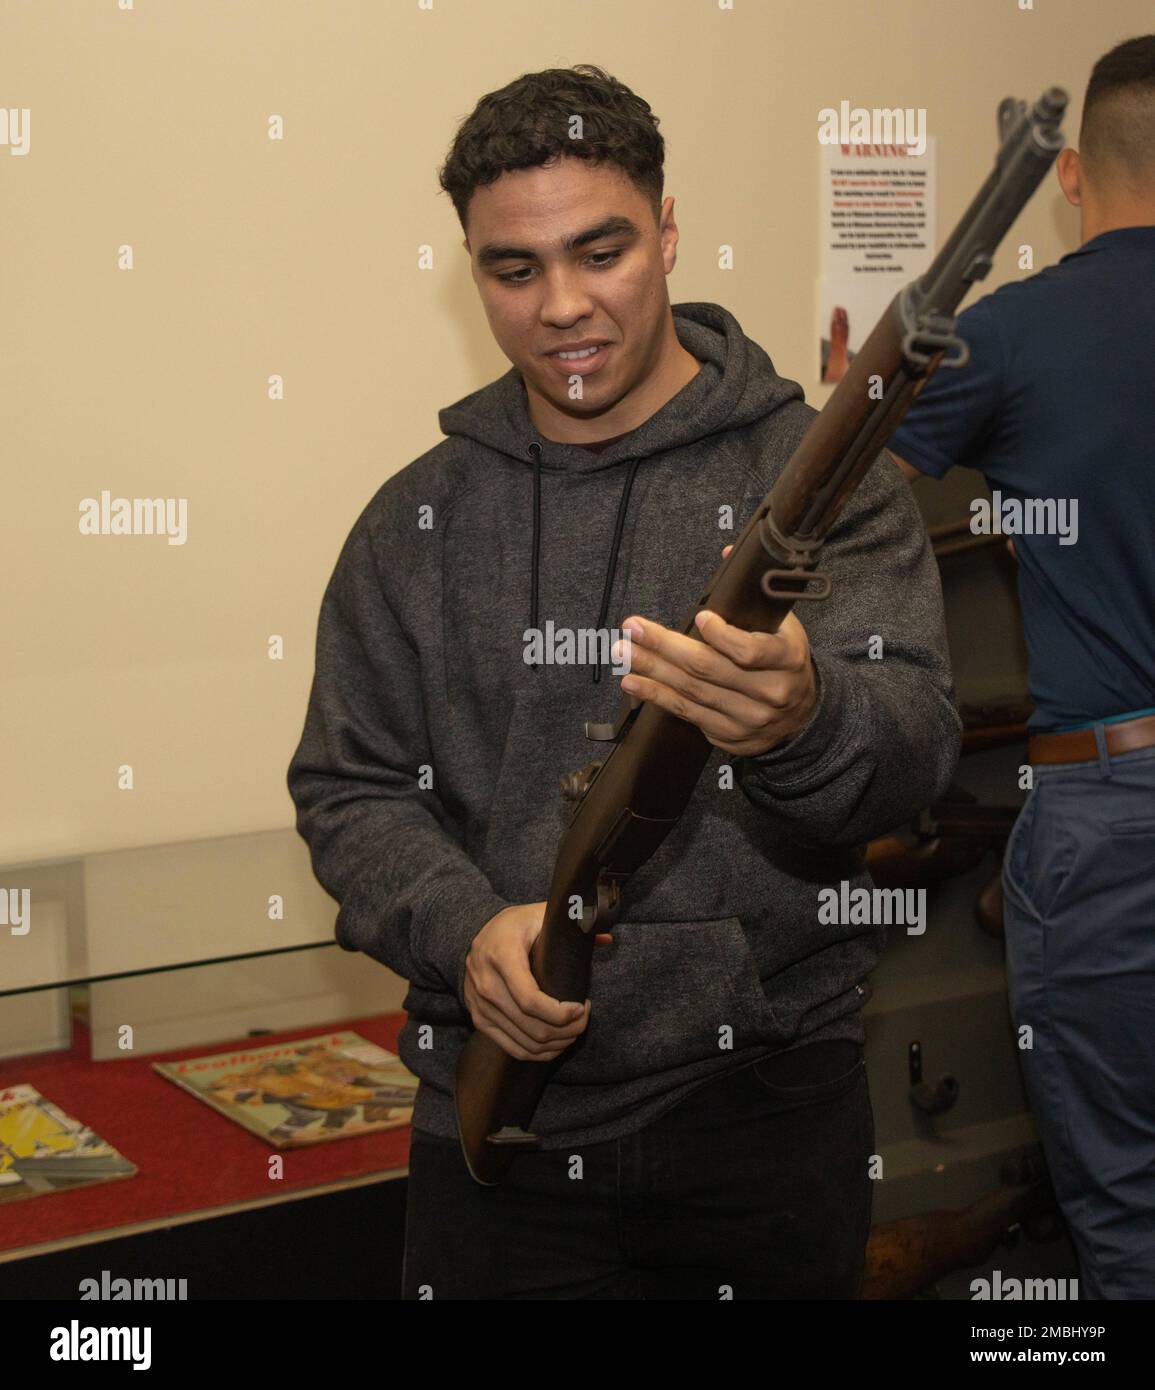 U.S. Marine Corps Sgt. Abel Rivera, a food service specialist with Food Service company, Combat Logistics Regiment 37, 3rd Marine Logistics Group, holds an M1 Garand rifle recovered after the battle of Okinawa at the Battle of Okinawa Historical Display on Camp Kinser, Okinawa, Japan, June 16, 2022. Marines with Food Service company visited different World War II battle sites of Okinawa during a professional military education event to better understand their history and culture. Stock Photo